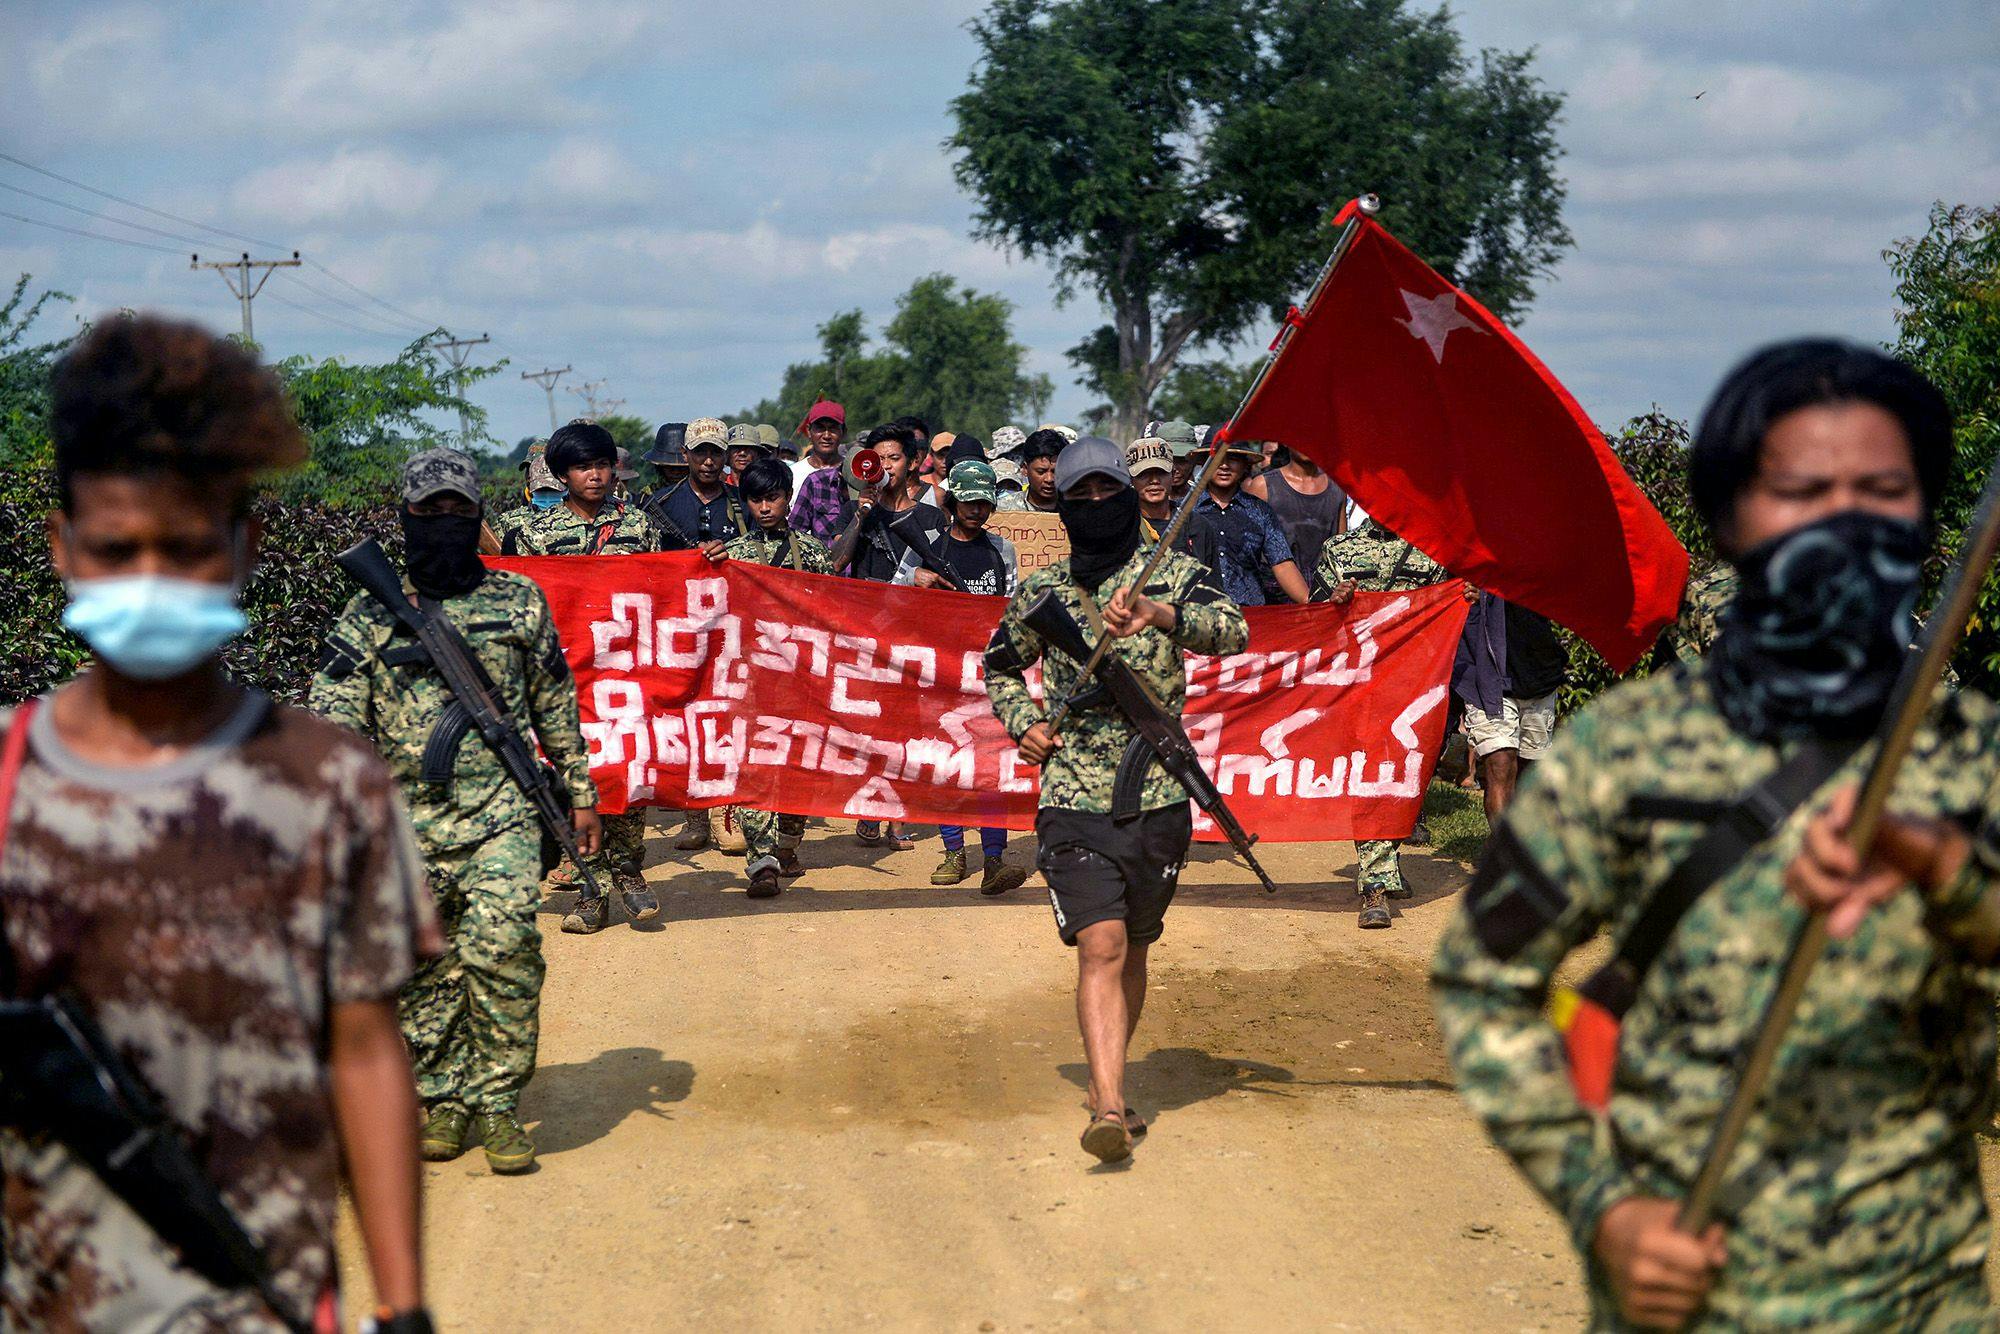 What future for Myanmar? Perspectives from the left